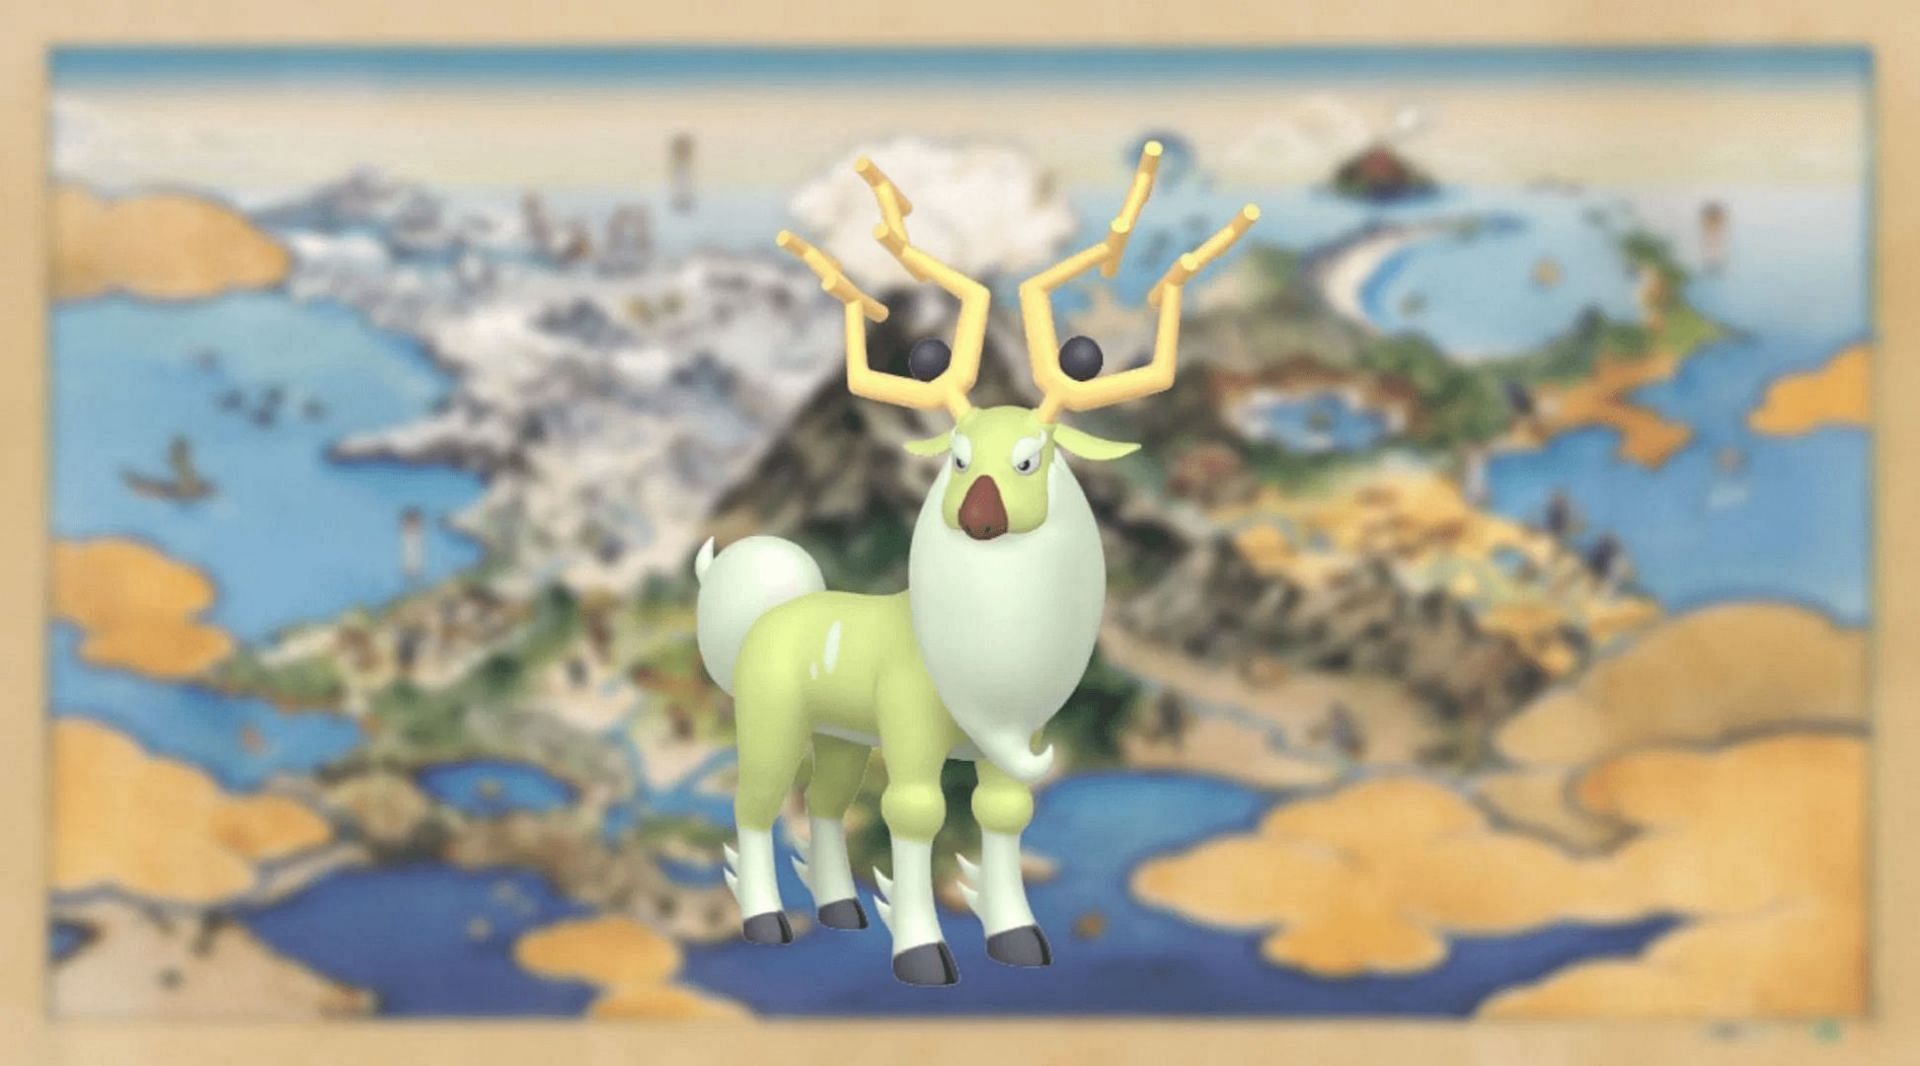 Shiny Wyrdeer will be available when the creature makes its Pokemon GO debut (Image via Game Freak)